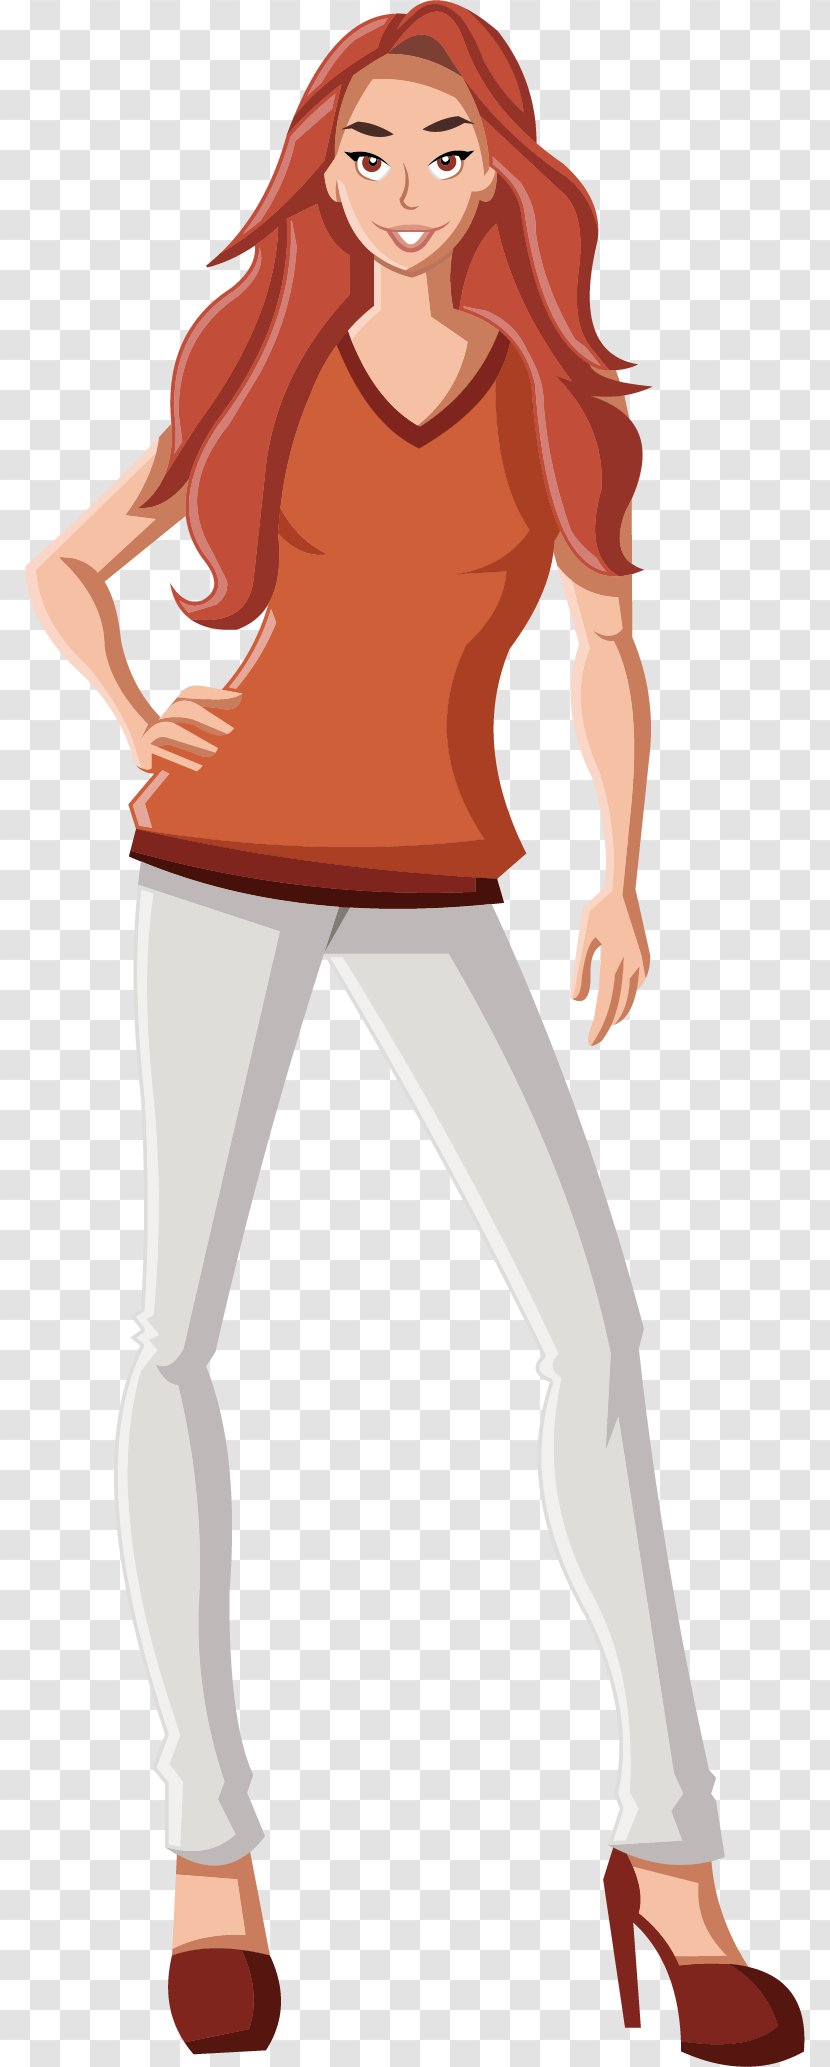 Long Haired Woman - Heart - Cartoon Transparent PNG